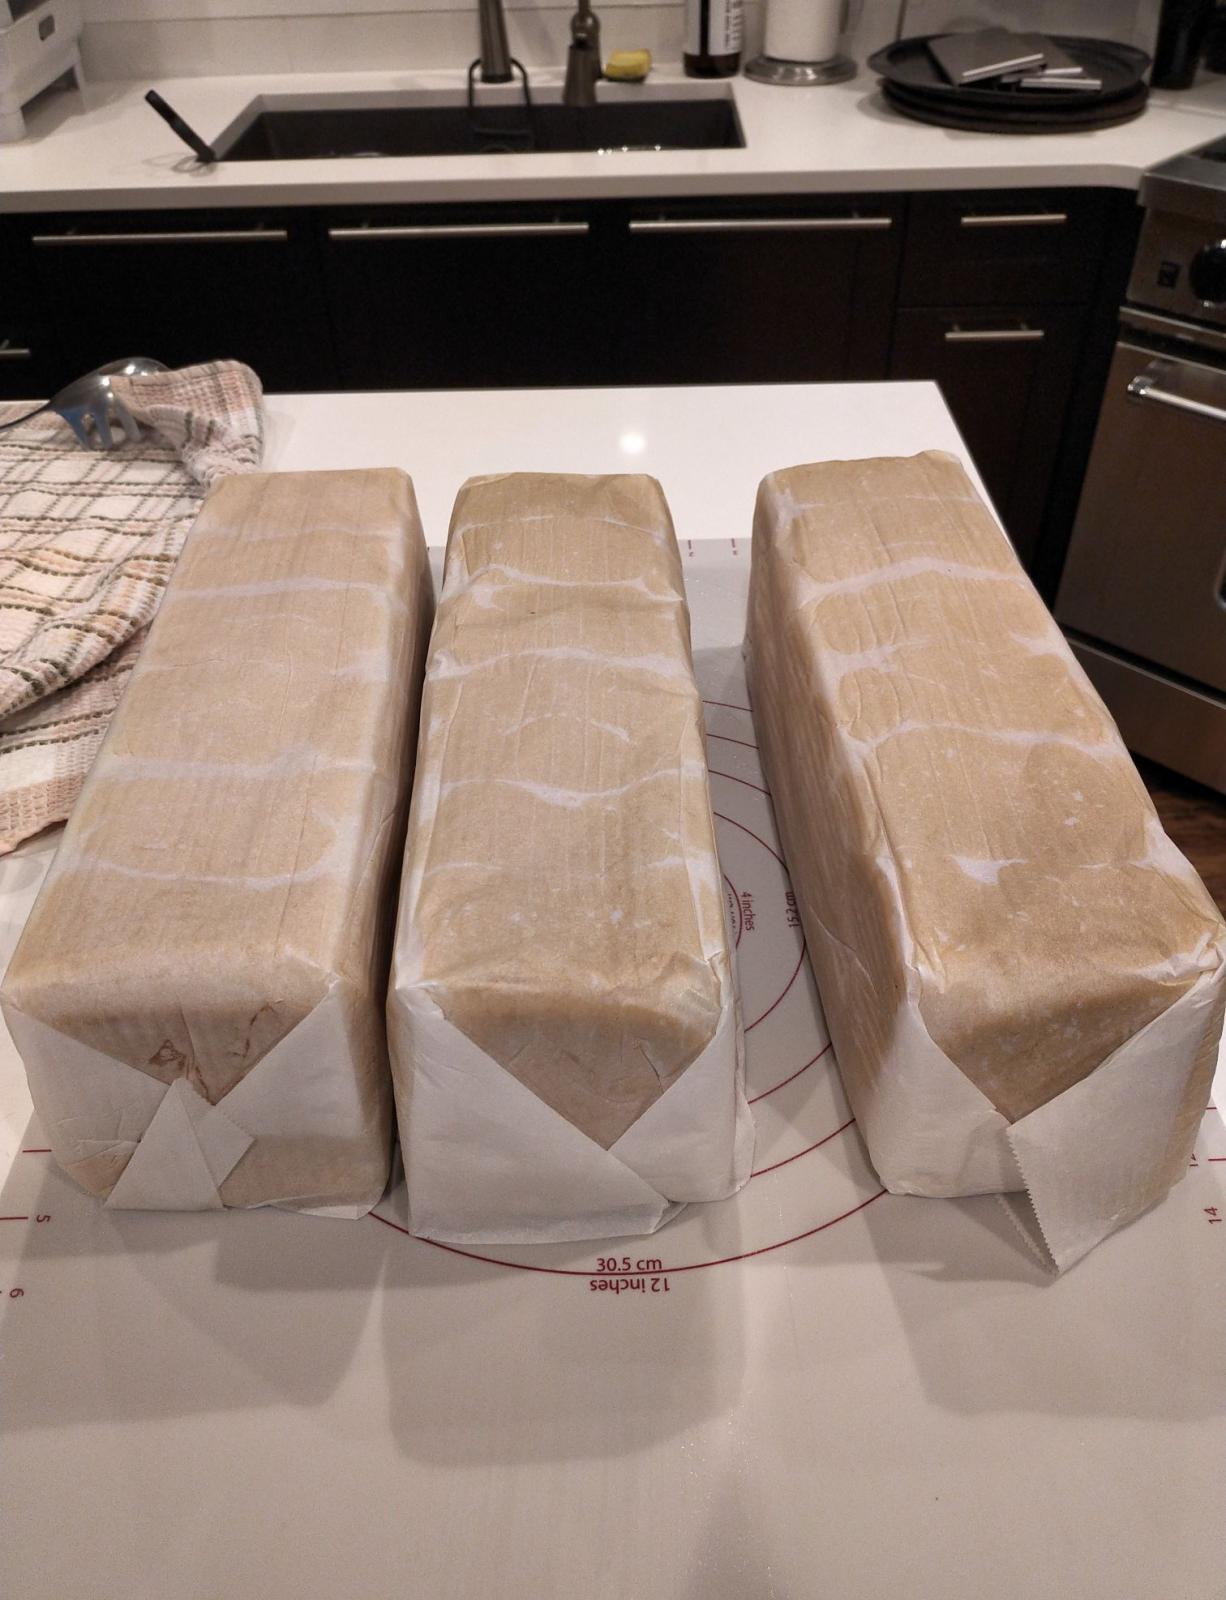 Parchment Wrapped Loafs